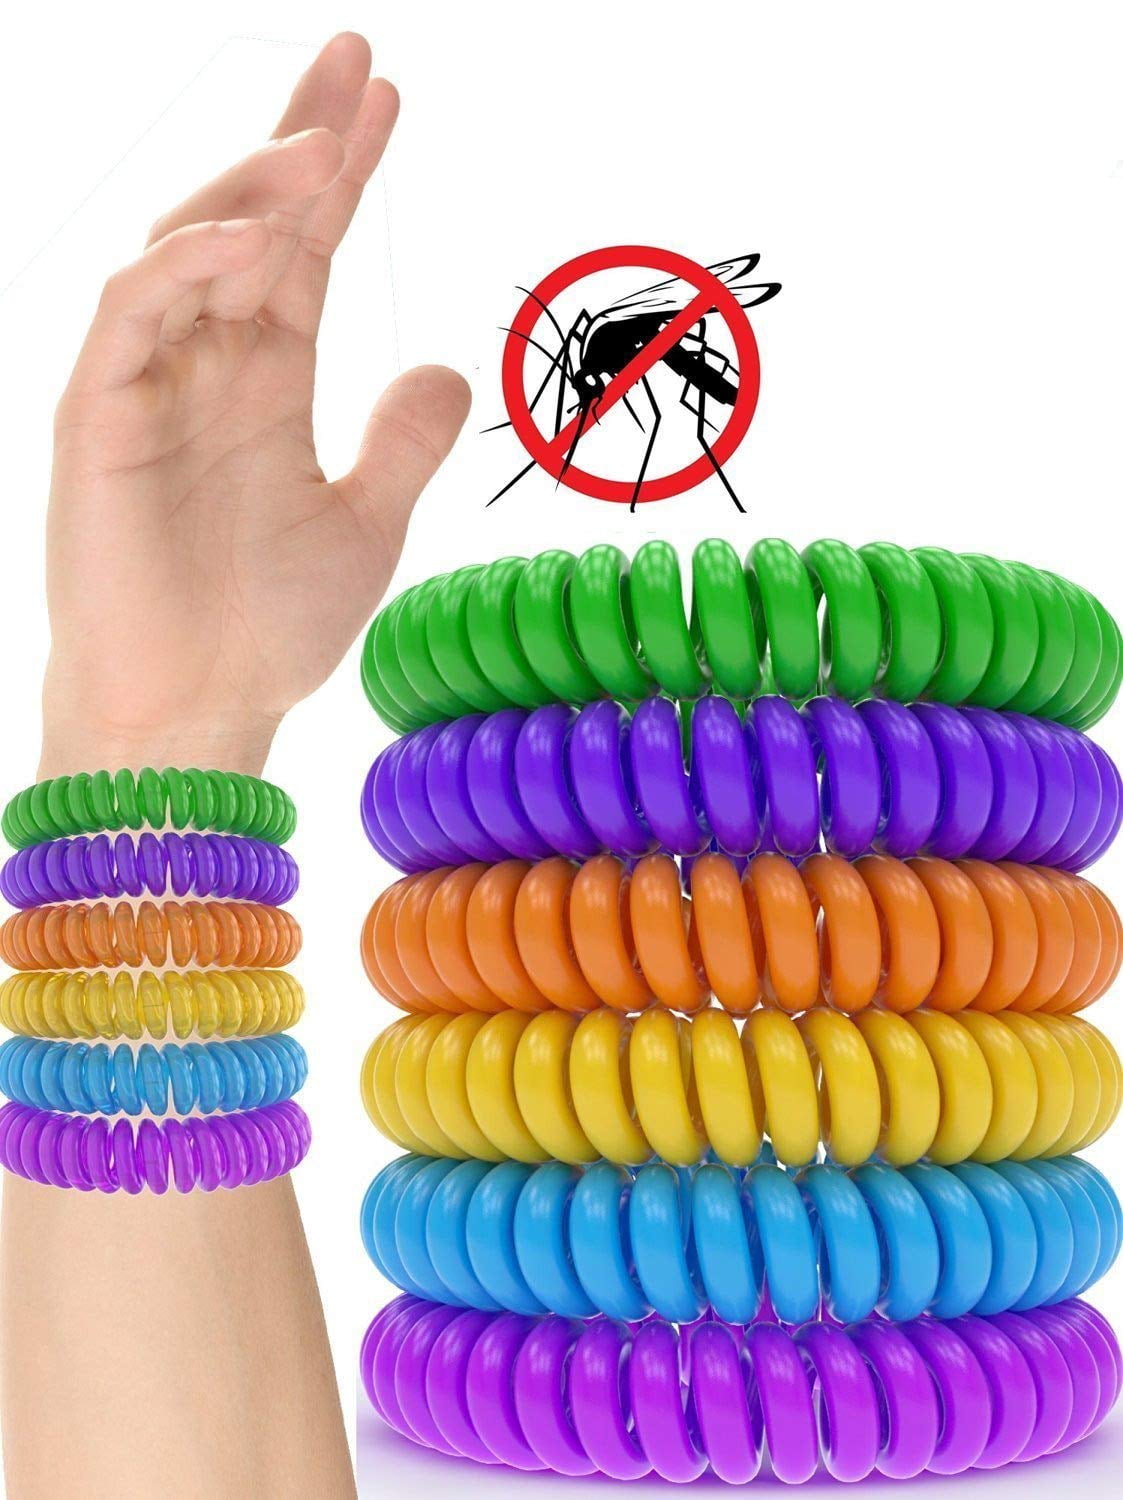 Mosquito Repellent Bracelet Anti Insect Free Wrist Band Travel Bug Repelle Prof 